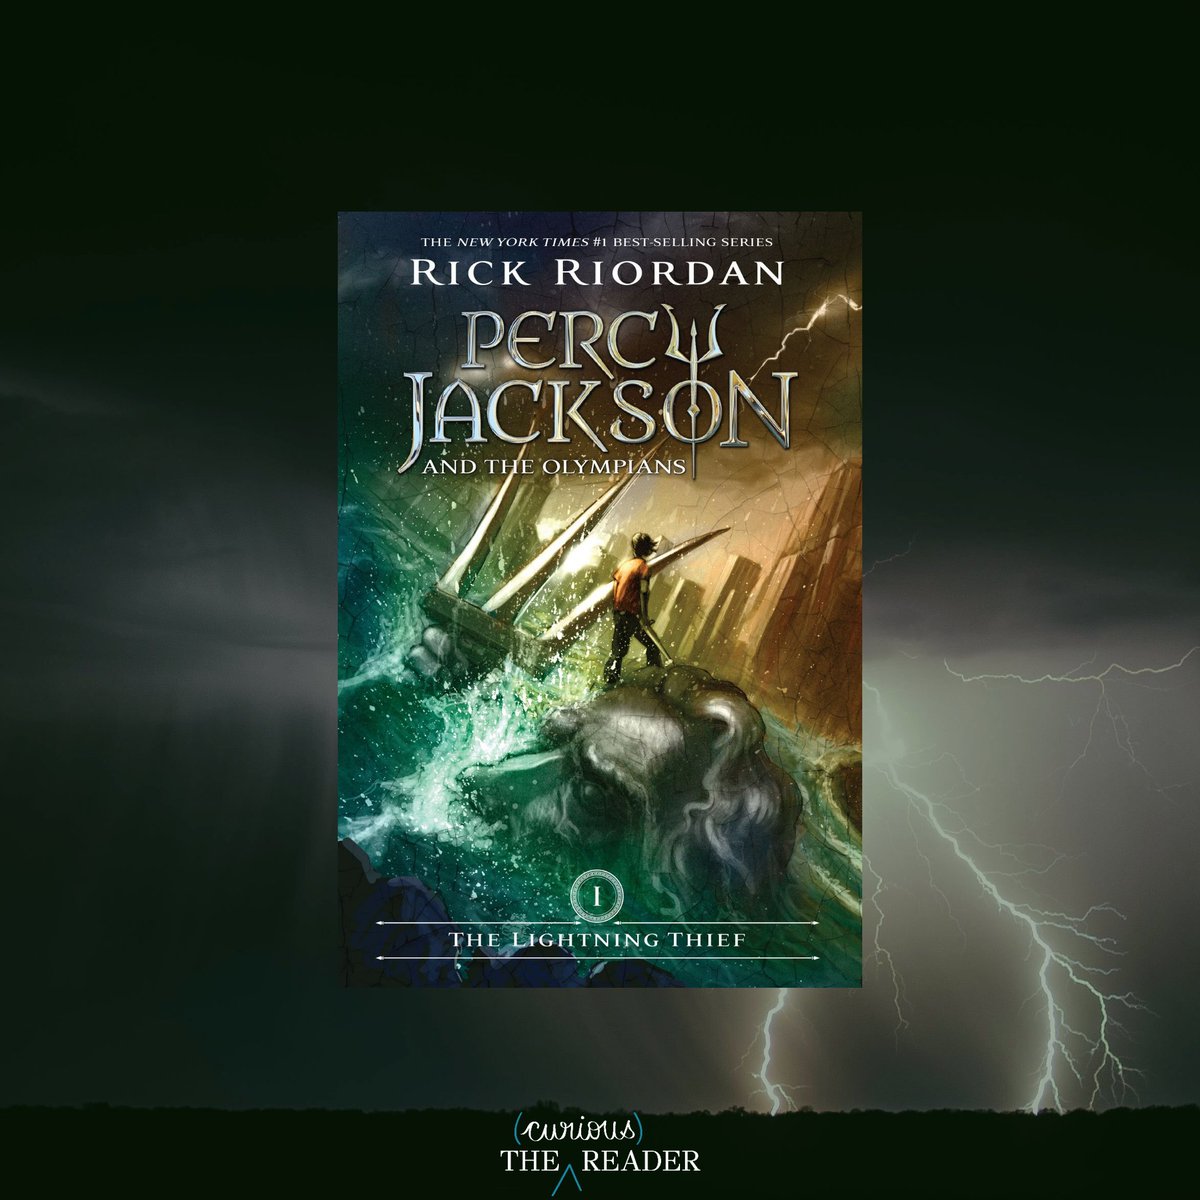 Prasanna Reads: While thunder rages on outside, I like a little bit of familiarity mixed with adventure in my monsoon reading. I always find myself going back to the Percy Jackson series which narrates the adventures of half-man, half-god, and his friends in a mythical world.